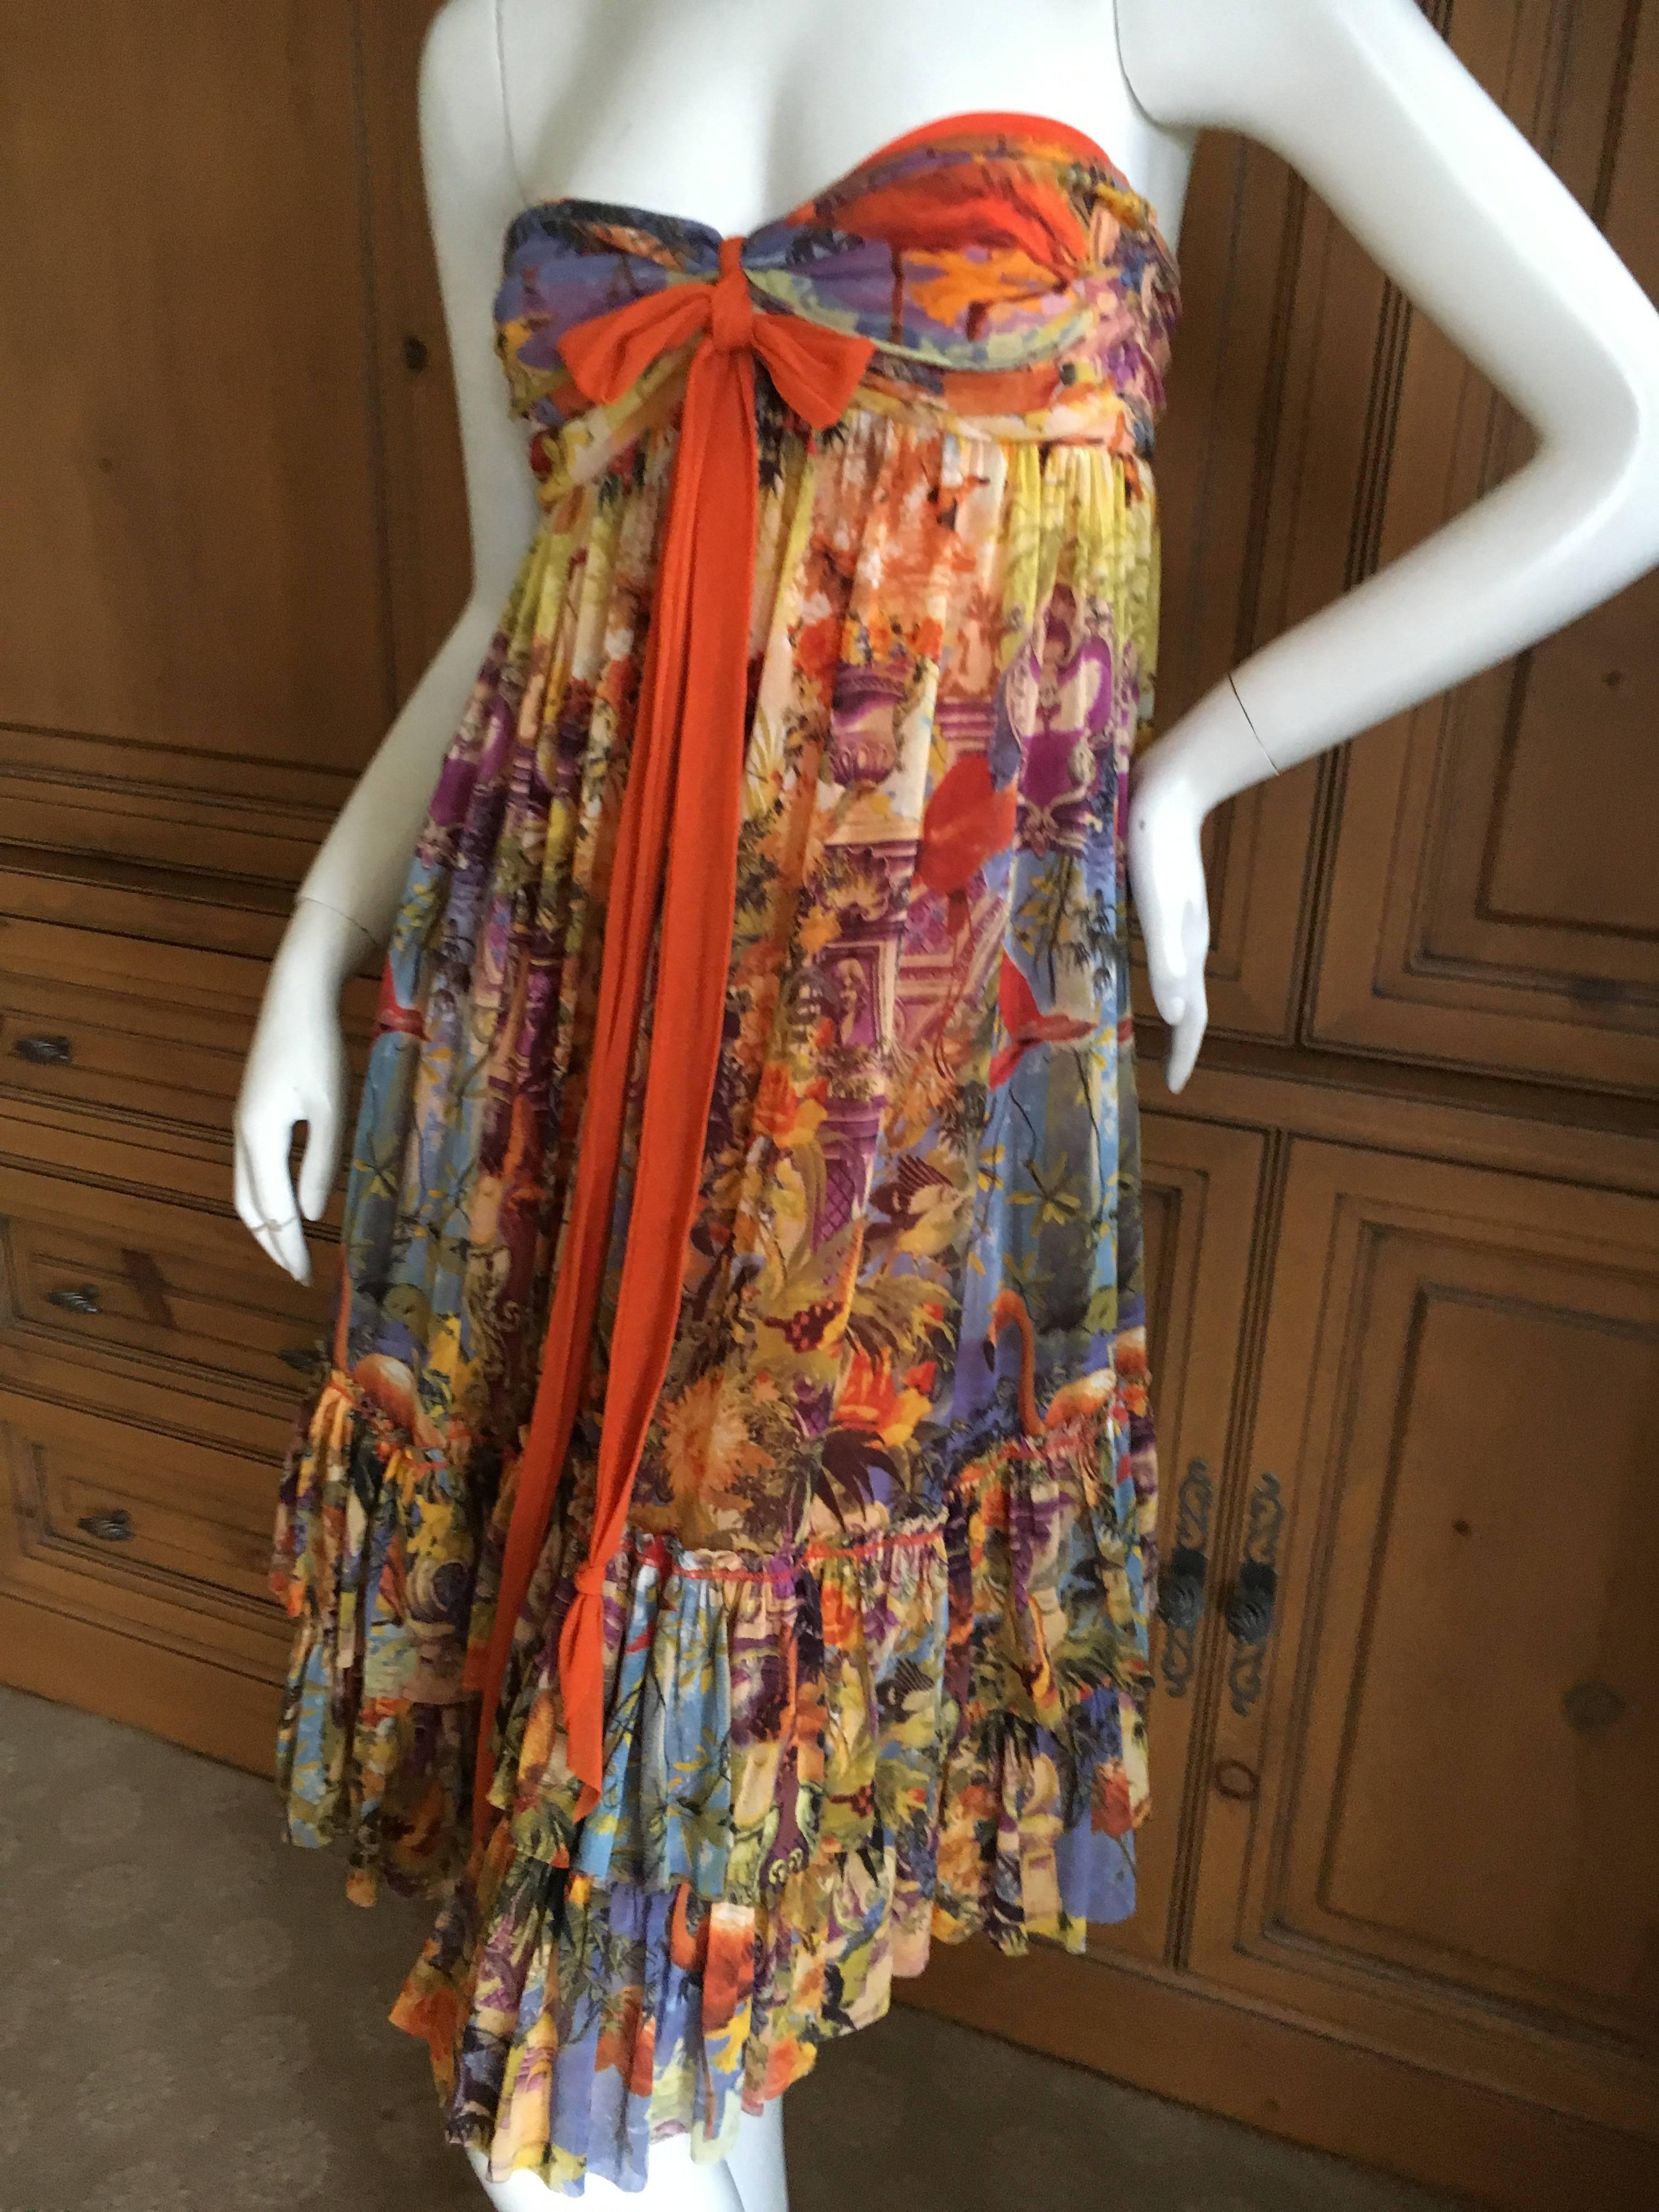 Jean Paul Gaultier Soleil Colorfull Strapless Dress by Fuzzi.
Romantic ruffles with a bow, size S.
Bust 34